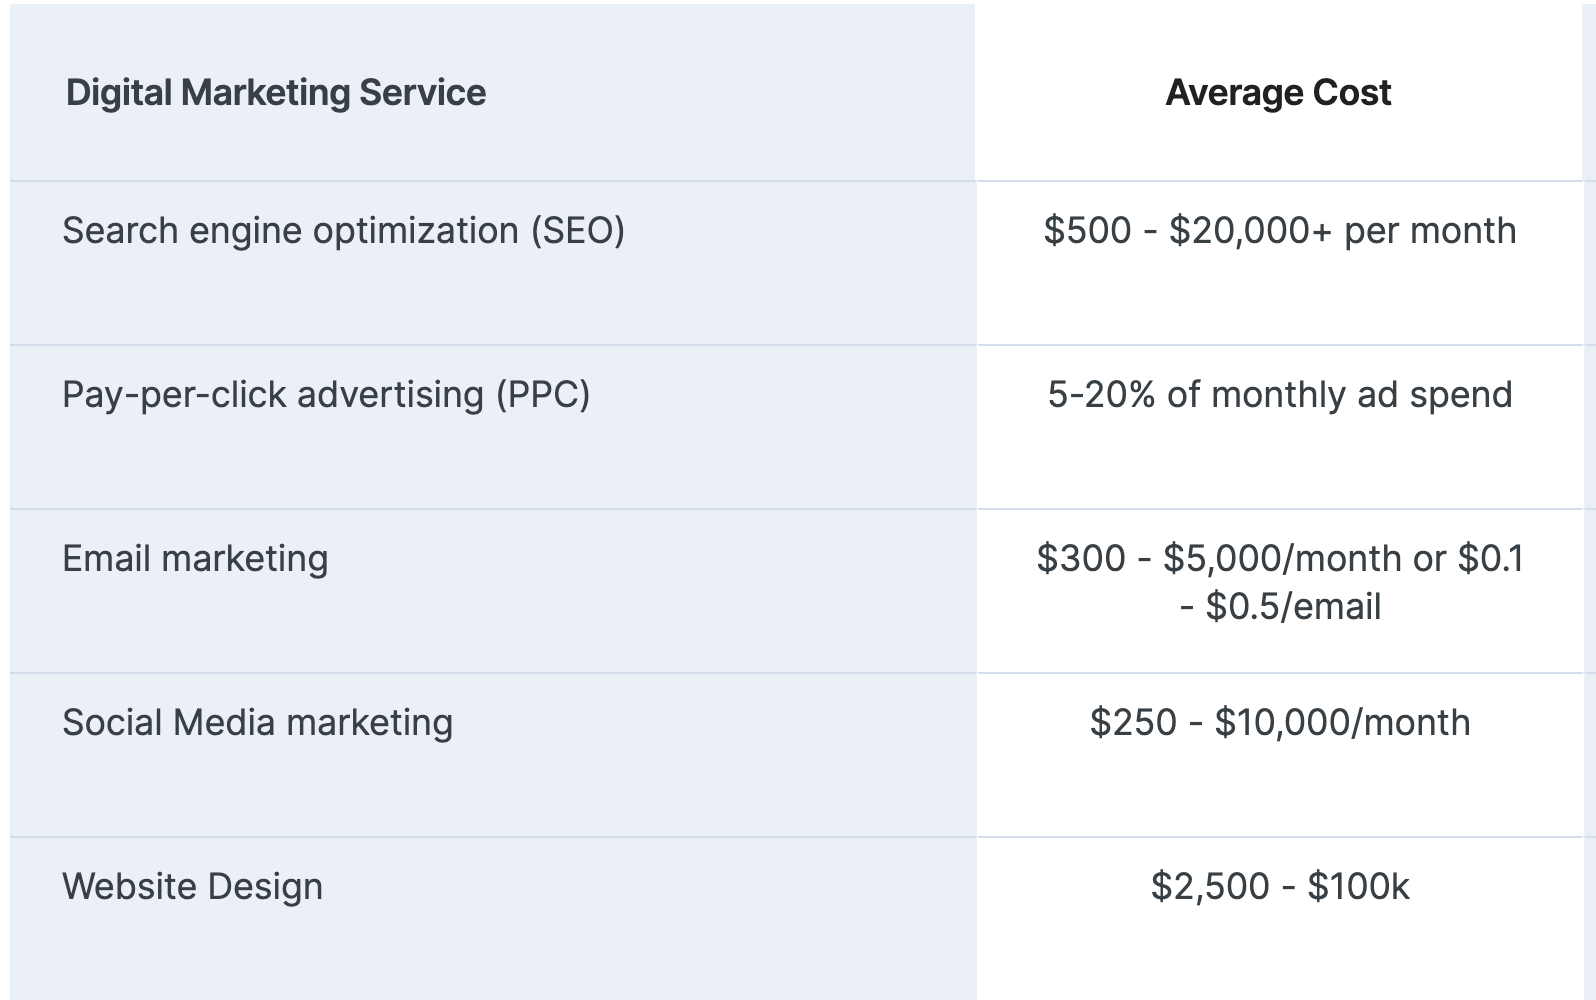 table with average cost of various digital marketing services